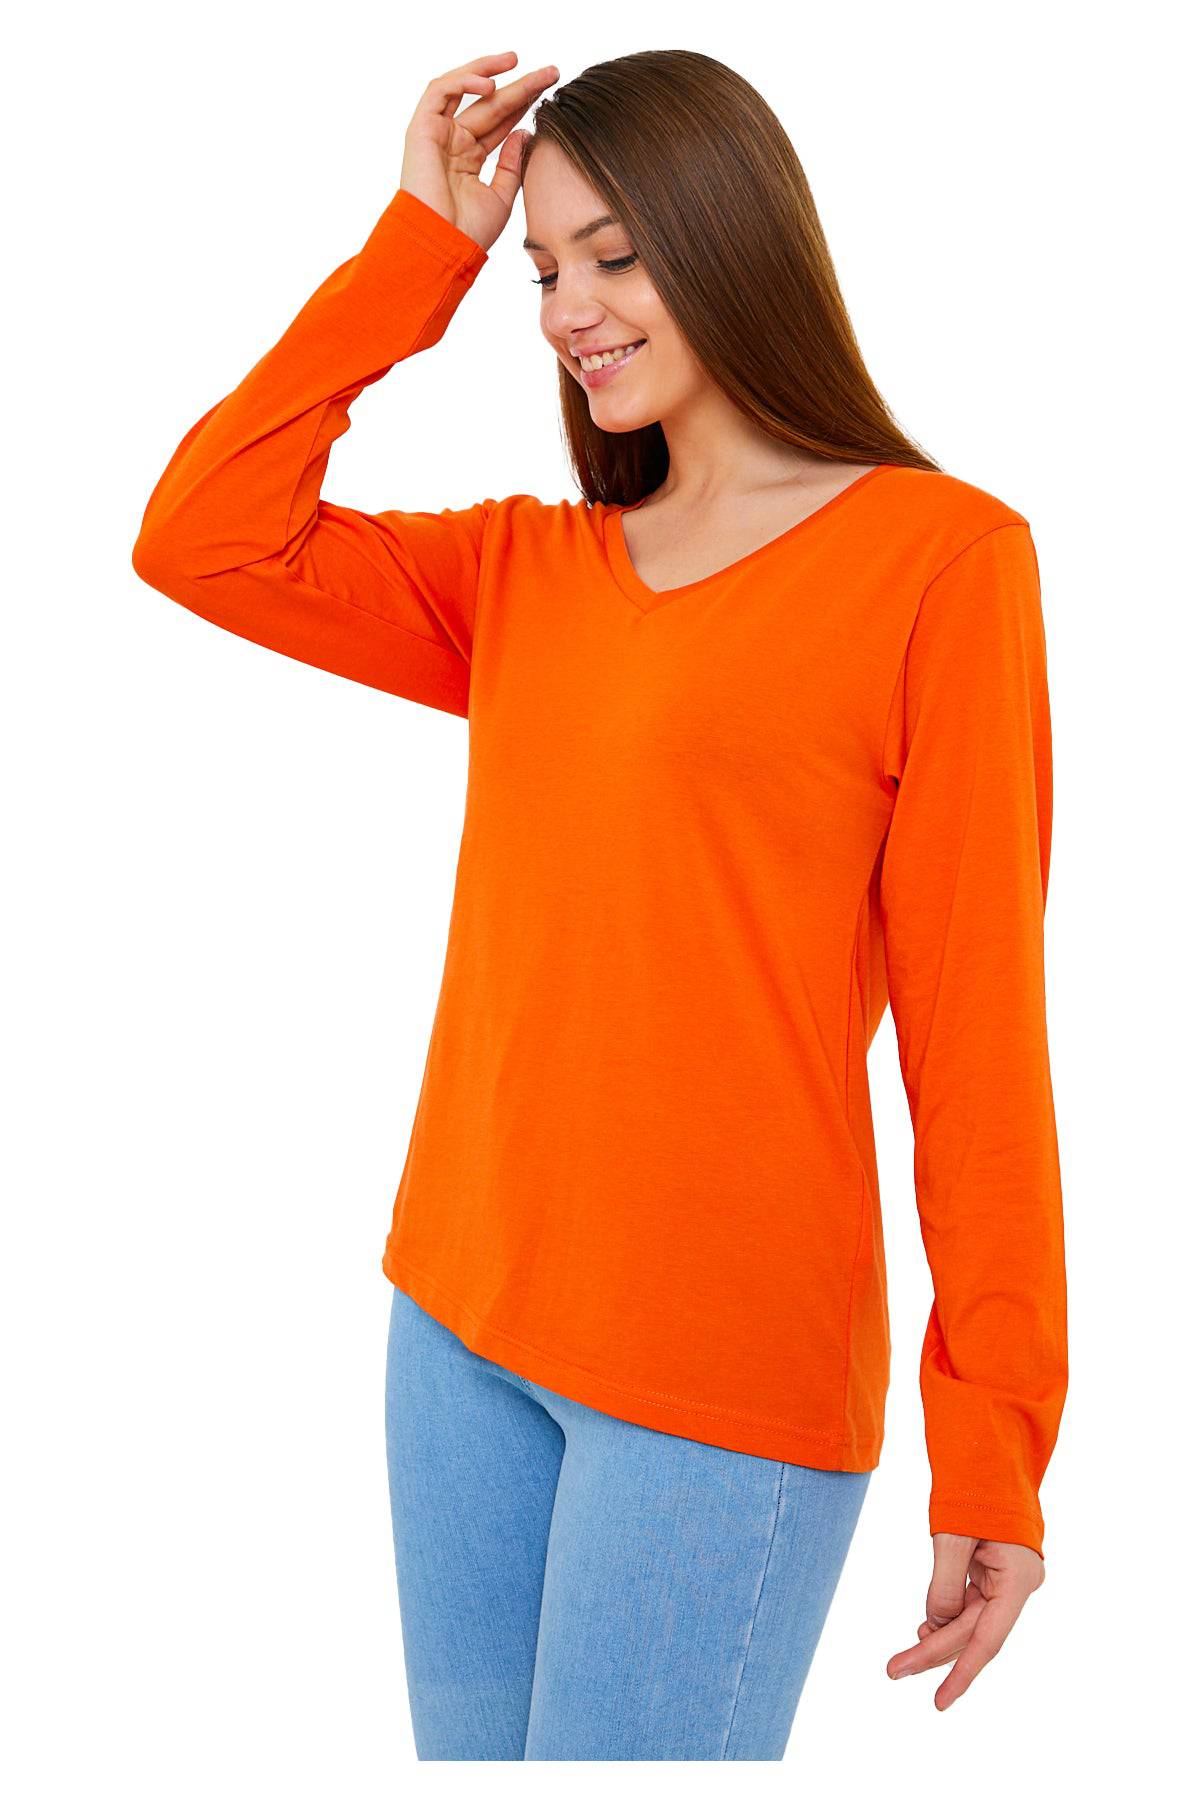 Long Sleeve V Neck T-Shirts for Women & Girls - Colorful Pima Cotton-111